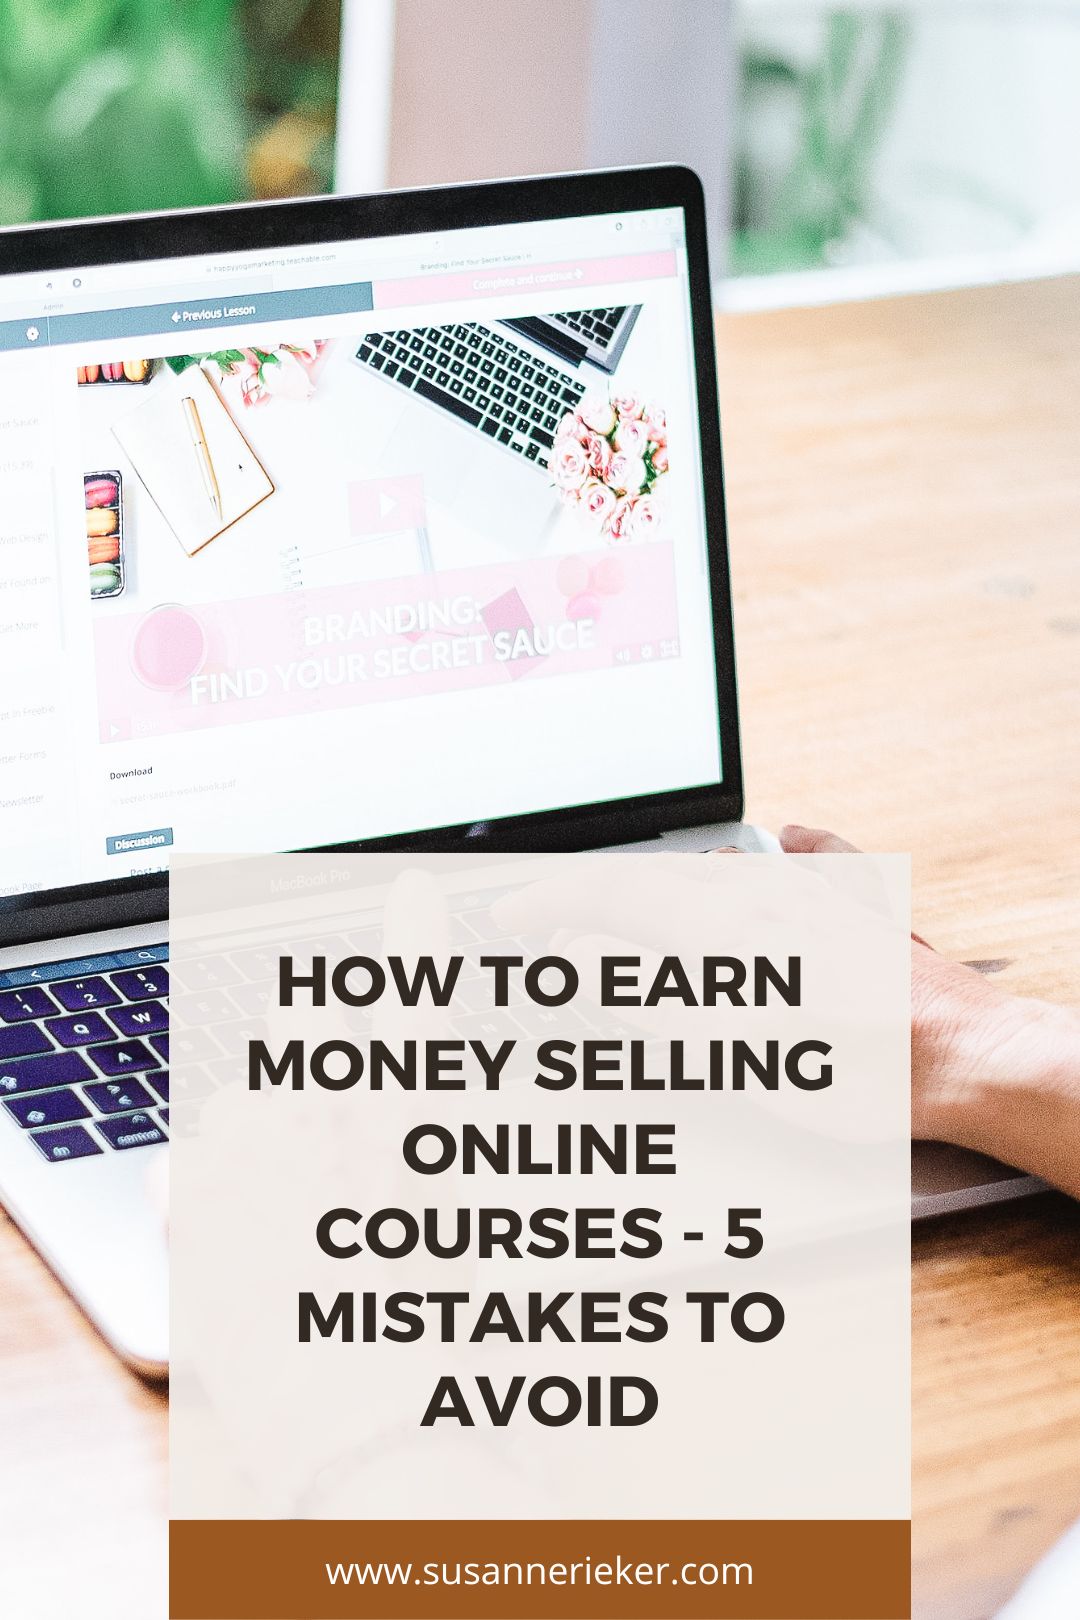 How to Earn Money Selling Online Courses - 5 Mistakes to Avoid